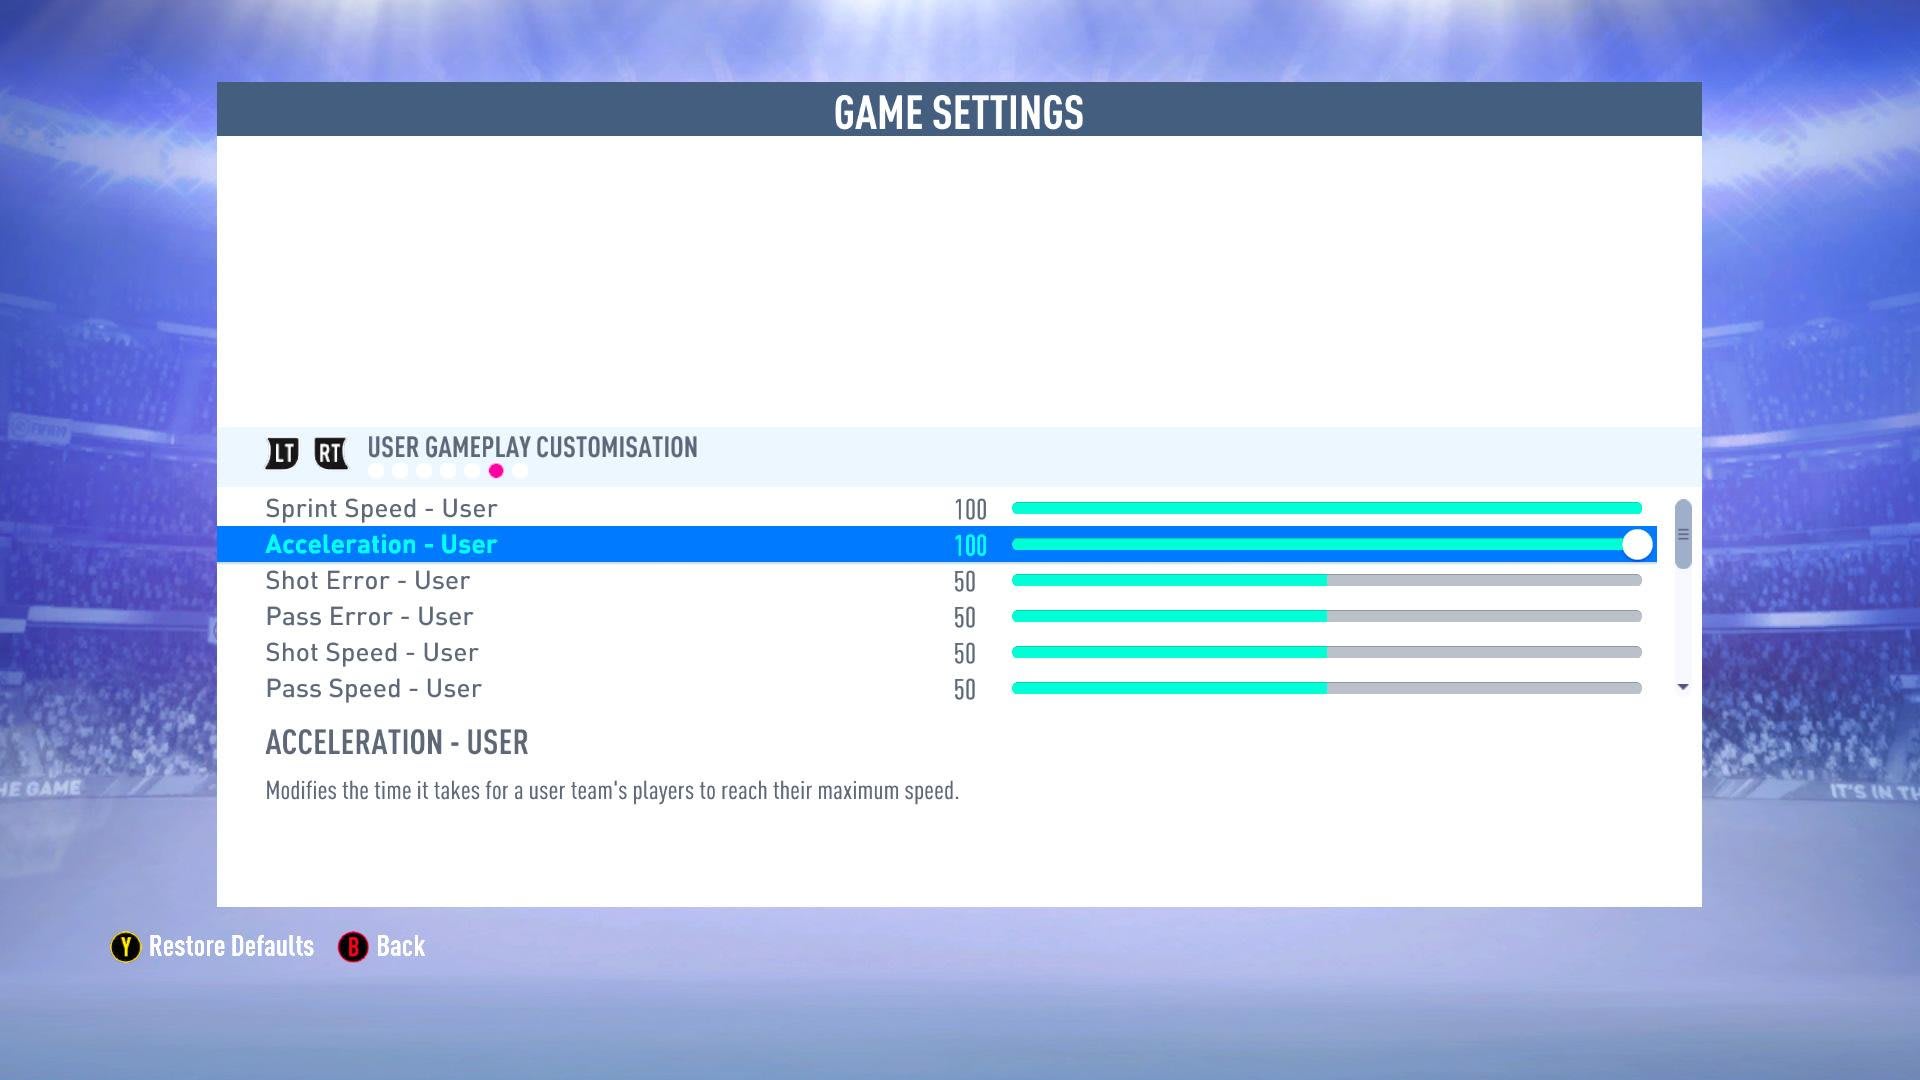 FIFA 19 Web App Troubleshooting Guide for the Most Common Issues